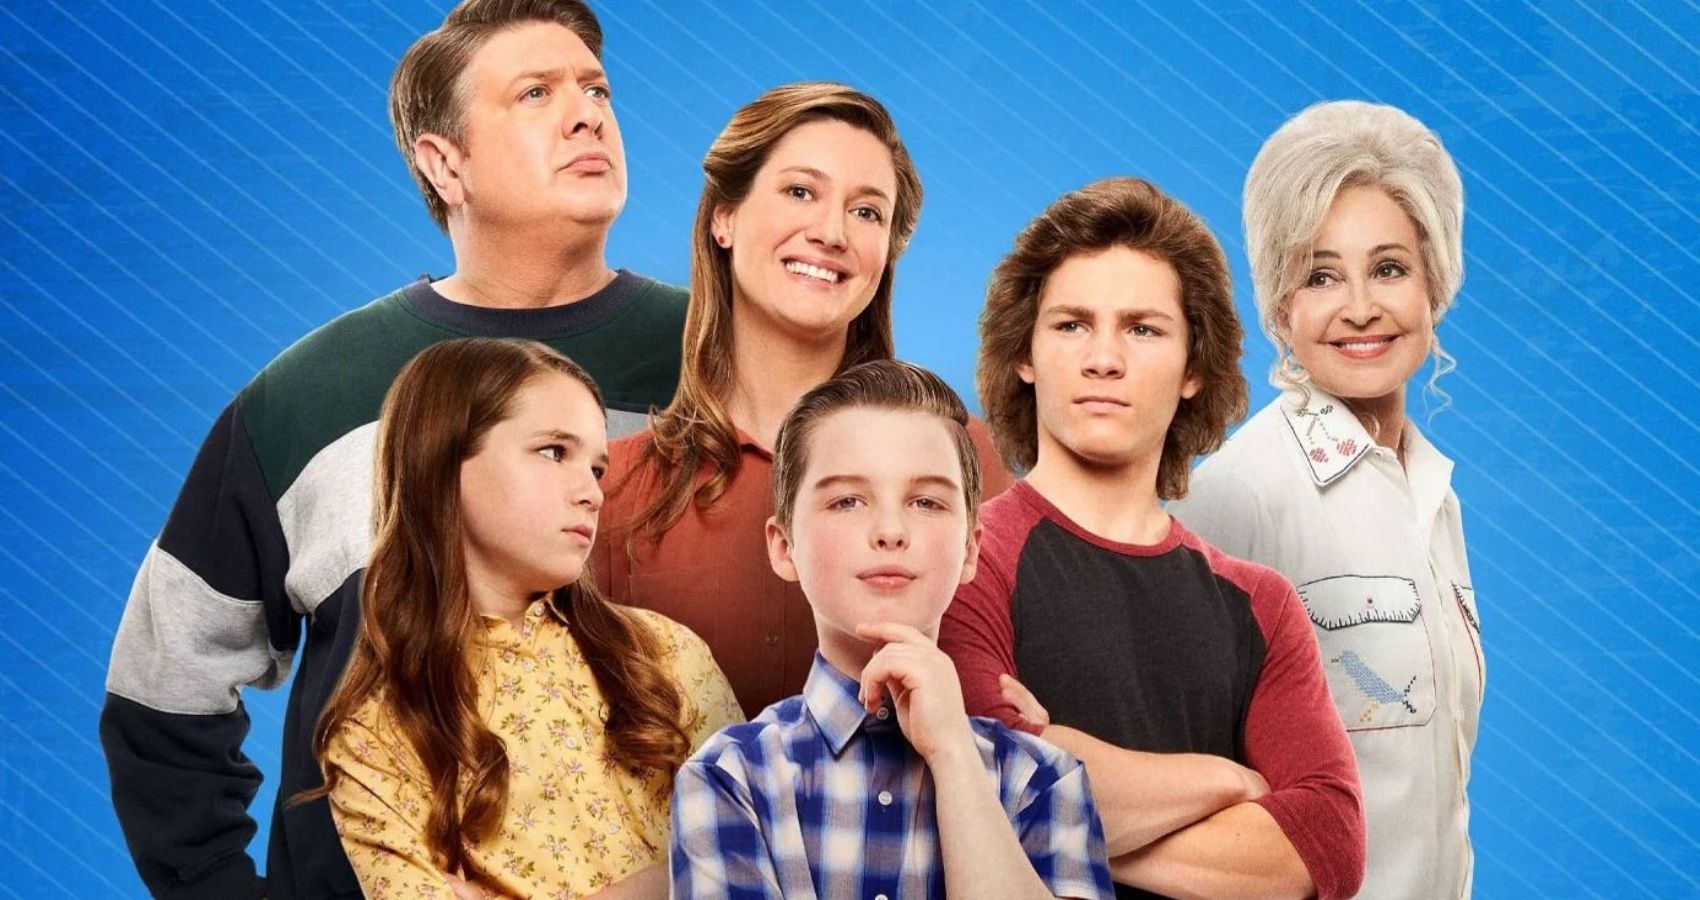 Young Sheldon Season 5 Why the Series Won't be the Same as Before